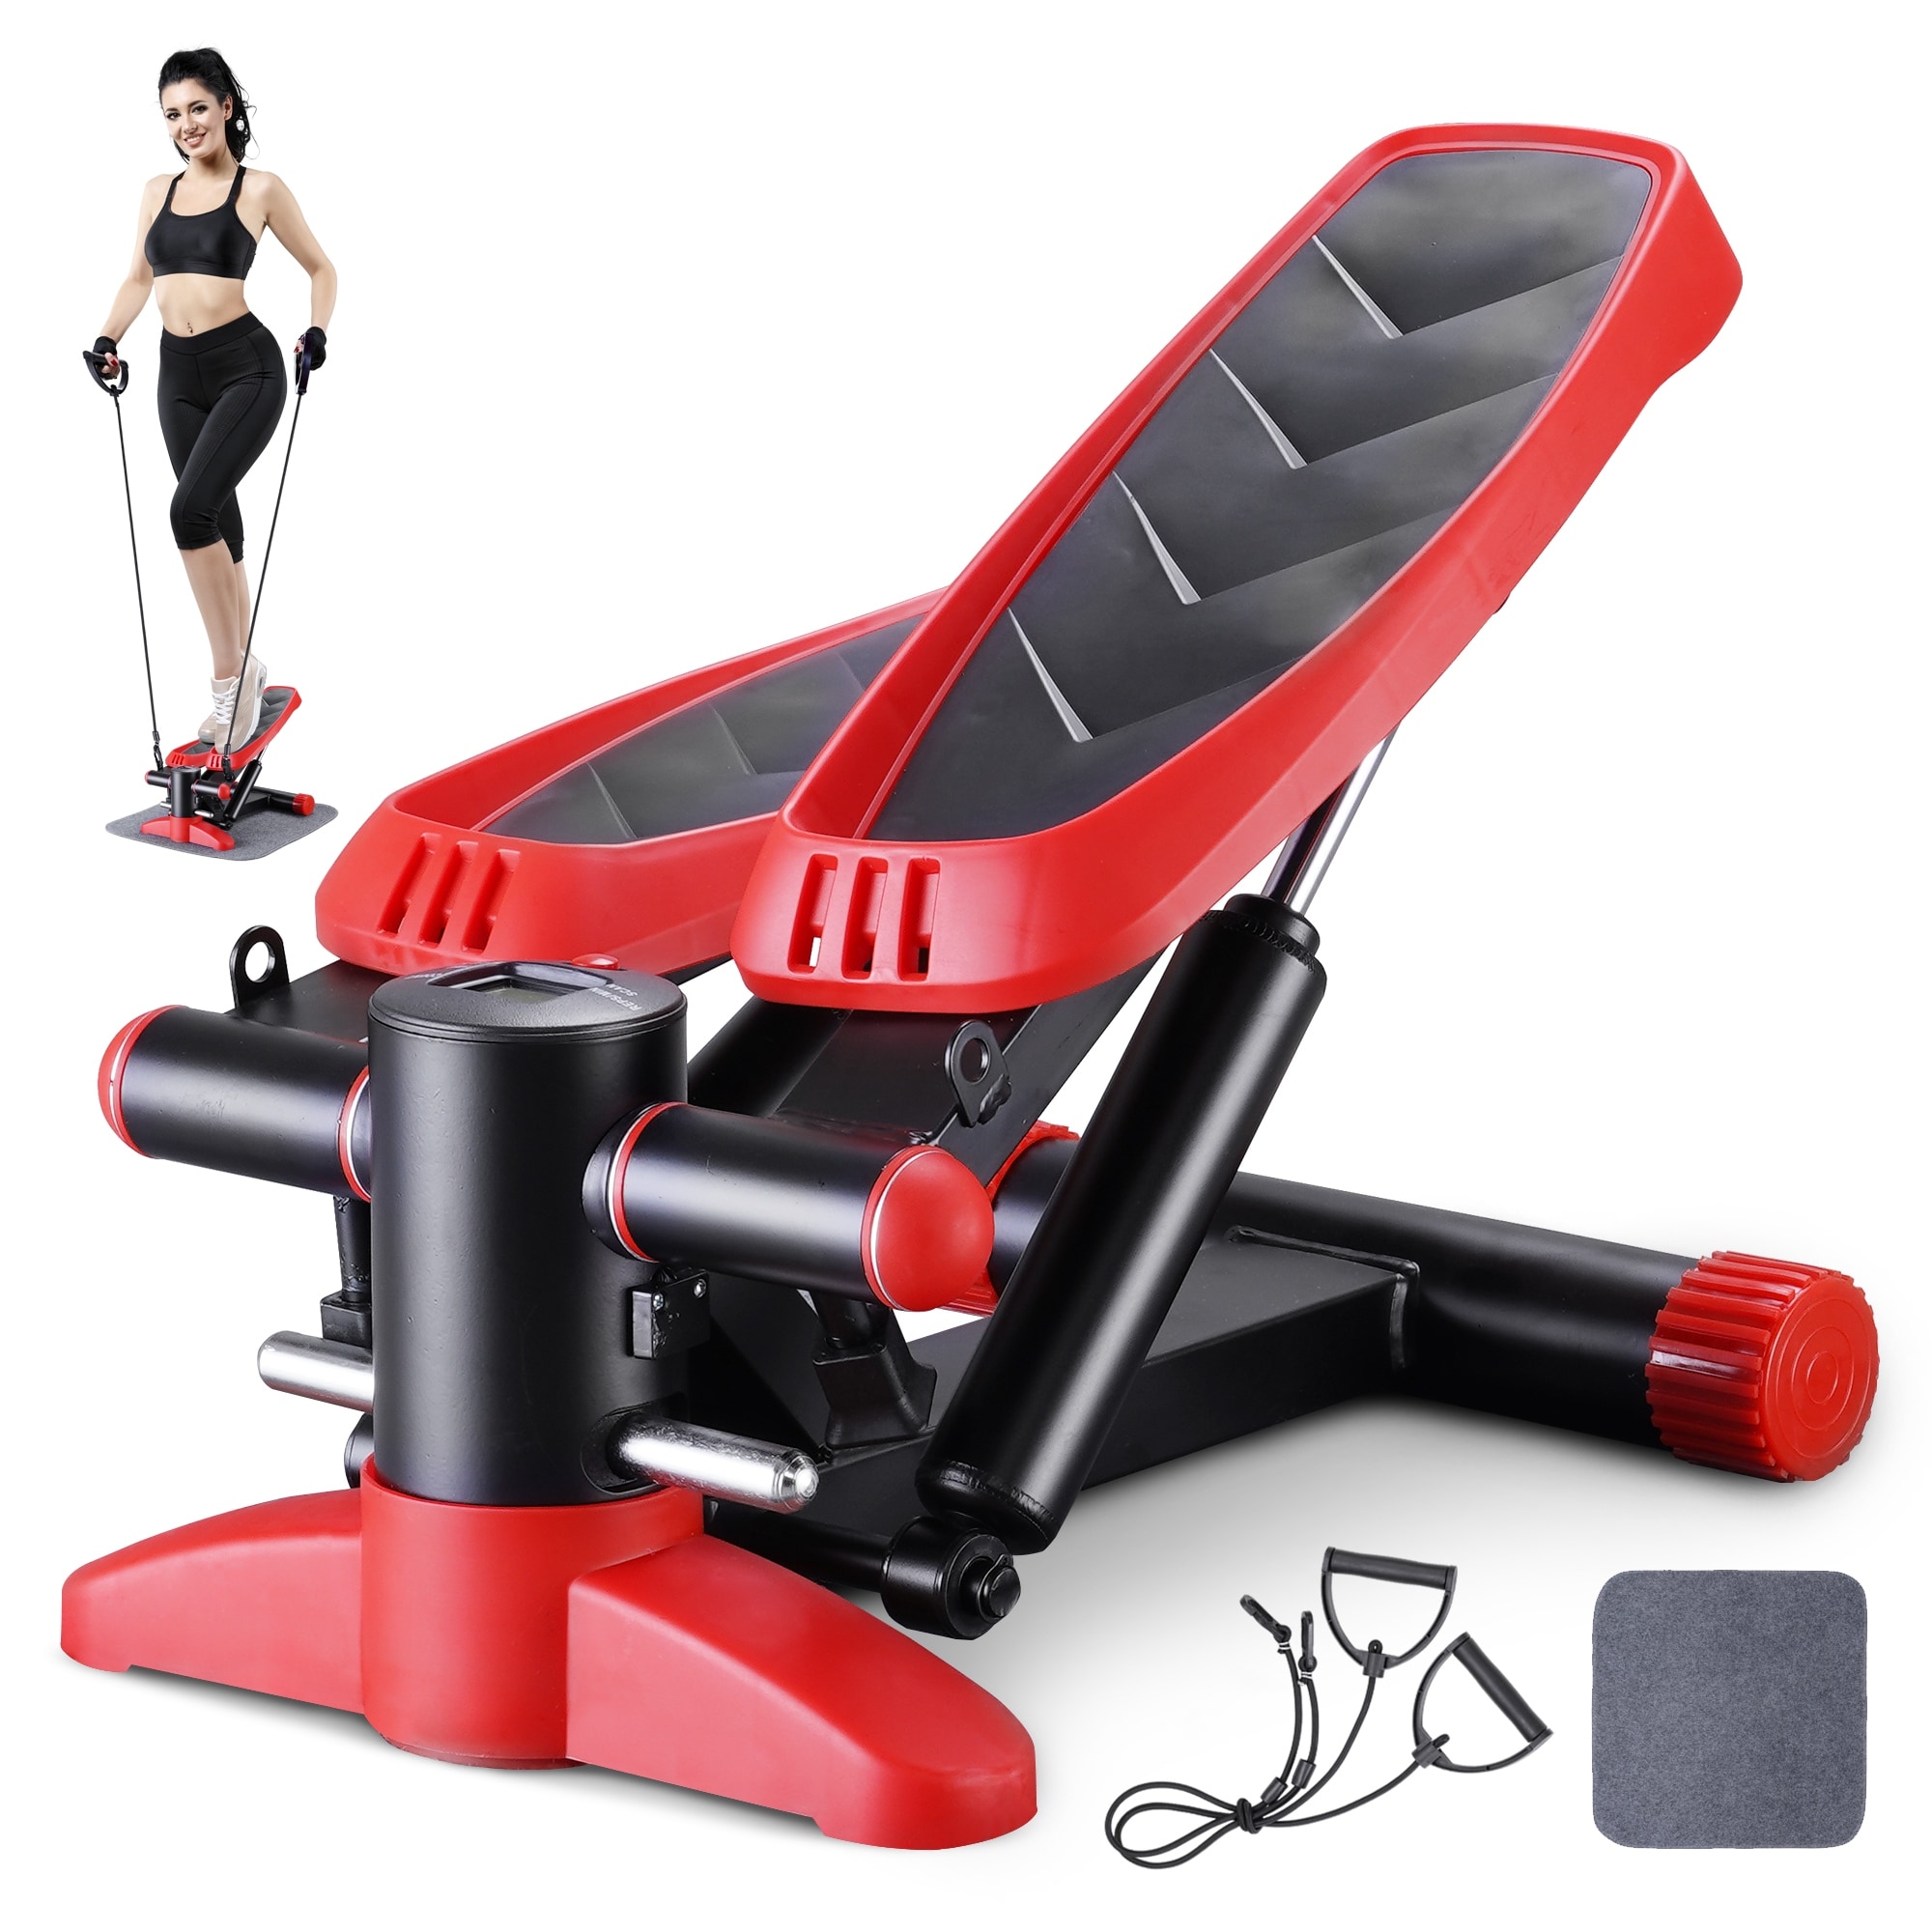 ZENOVA Mini Stair Stepper, Steppers for Exercise with Resistance Bands,  With 300 LBS Loading Capacity